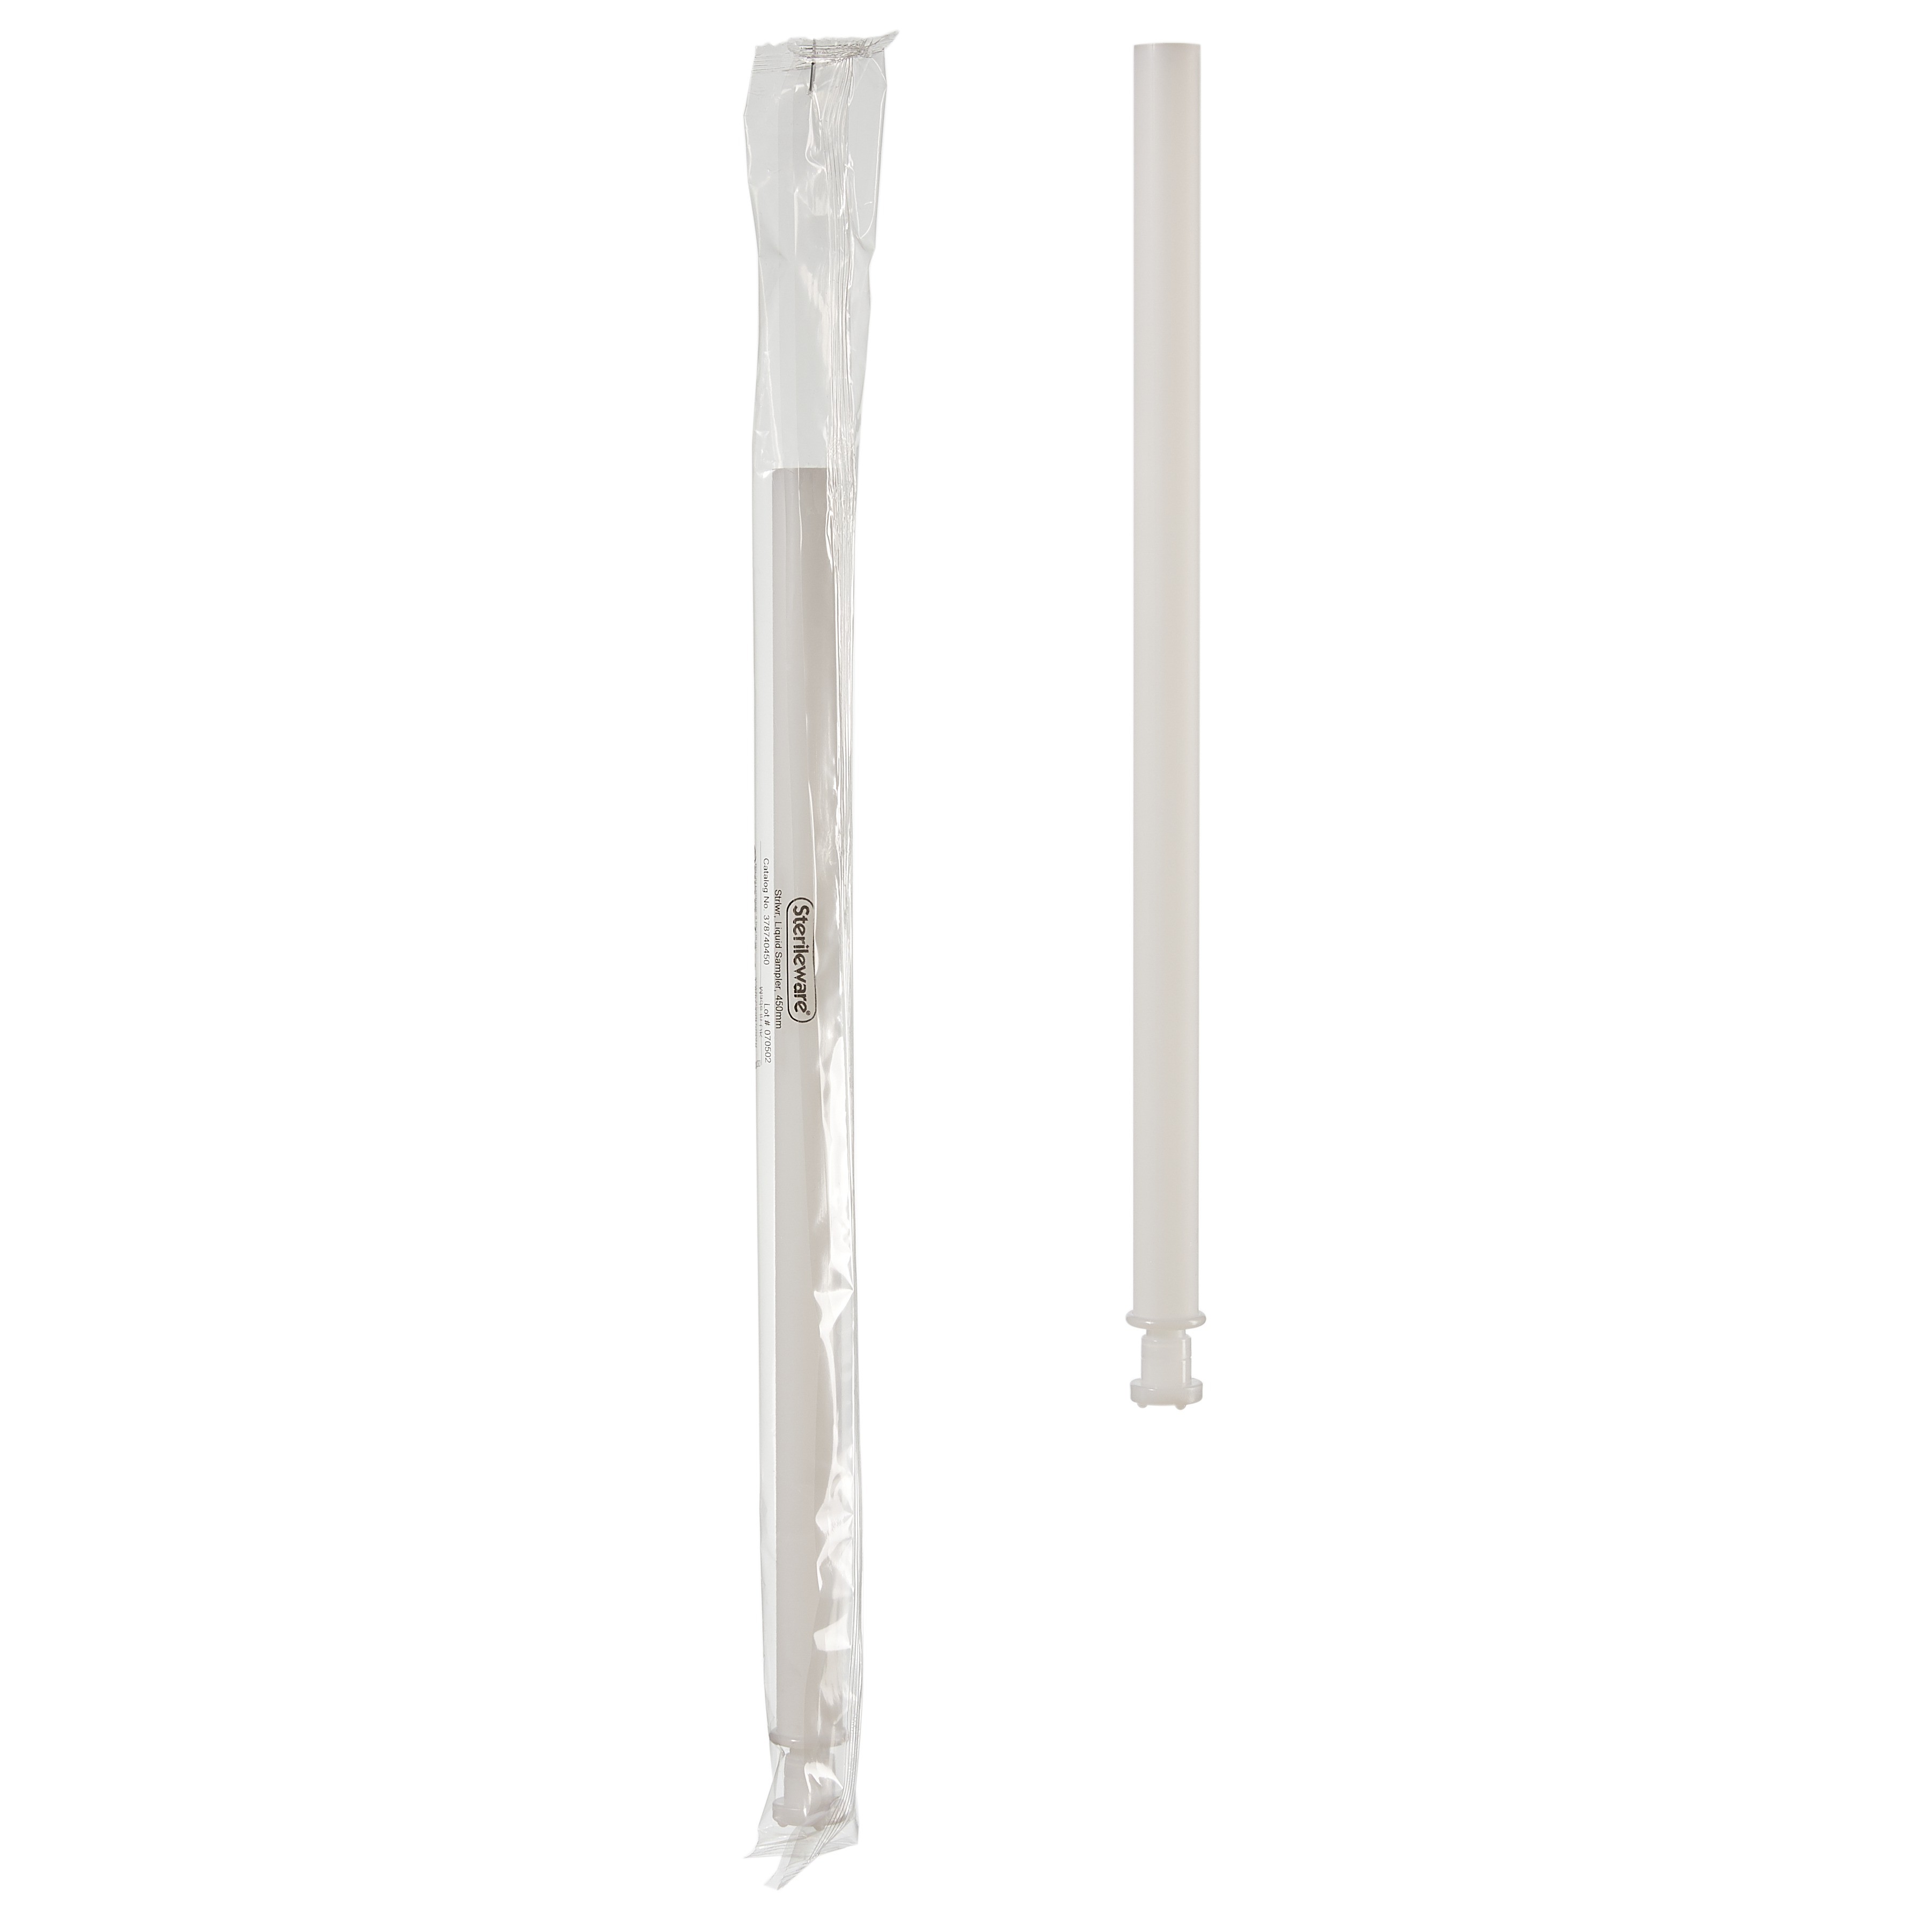 Sterileware Cross-Sectional Liquid Samplers; 45cm Length, Individually Wrapped (Pack of 20)